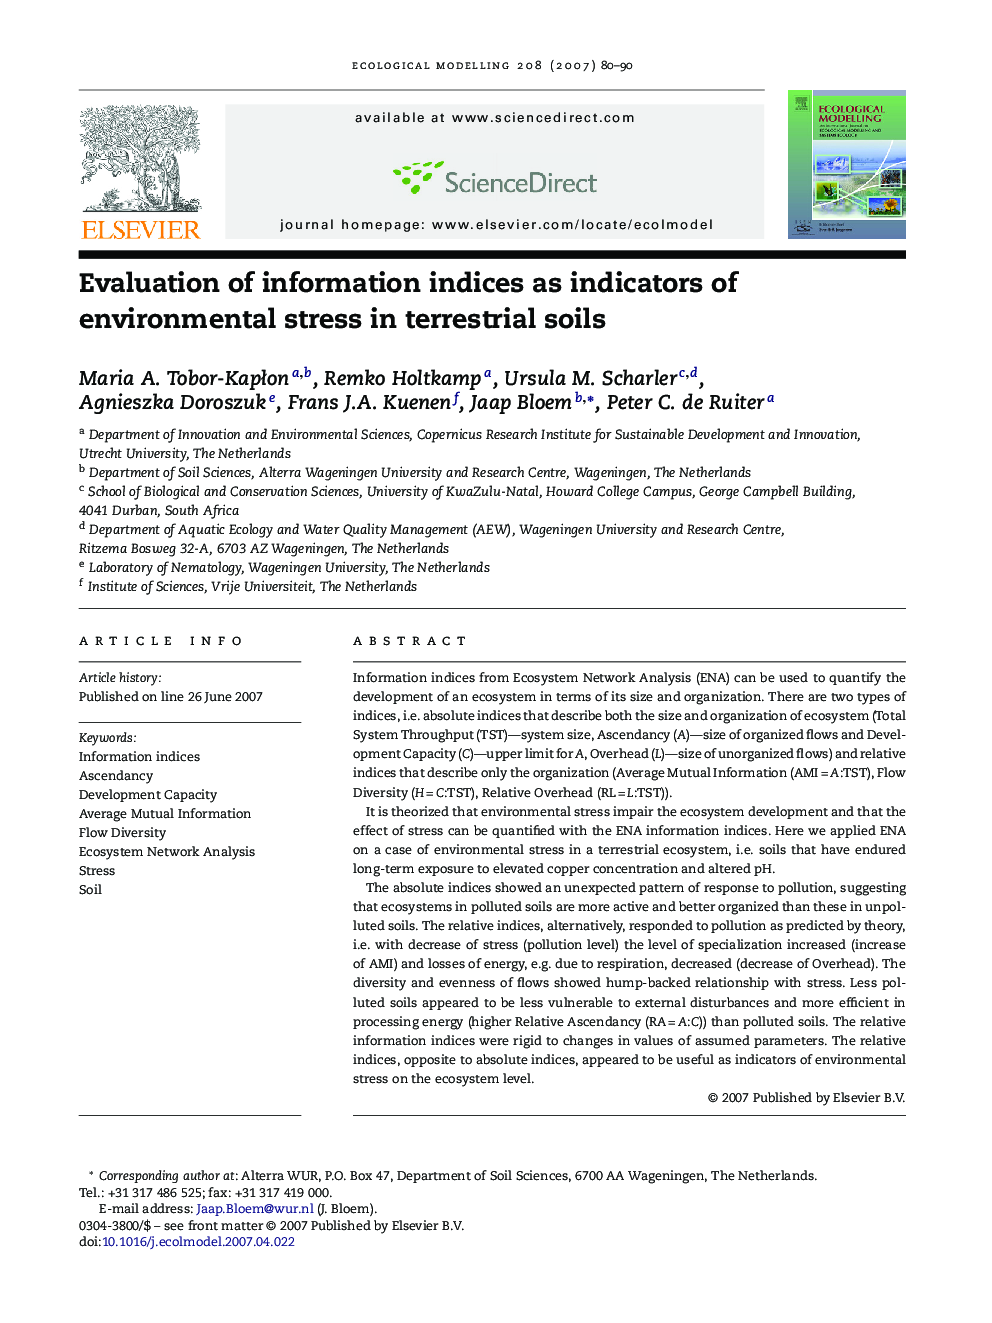 Evaluation of information indices as indicators of environmental stress in terrestrial soils